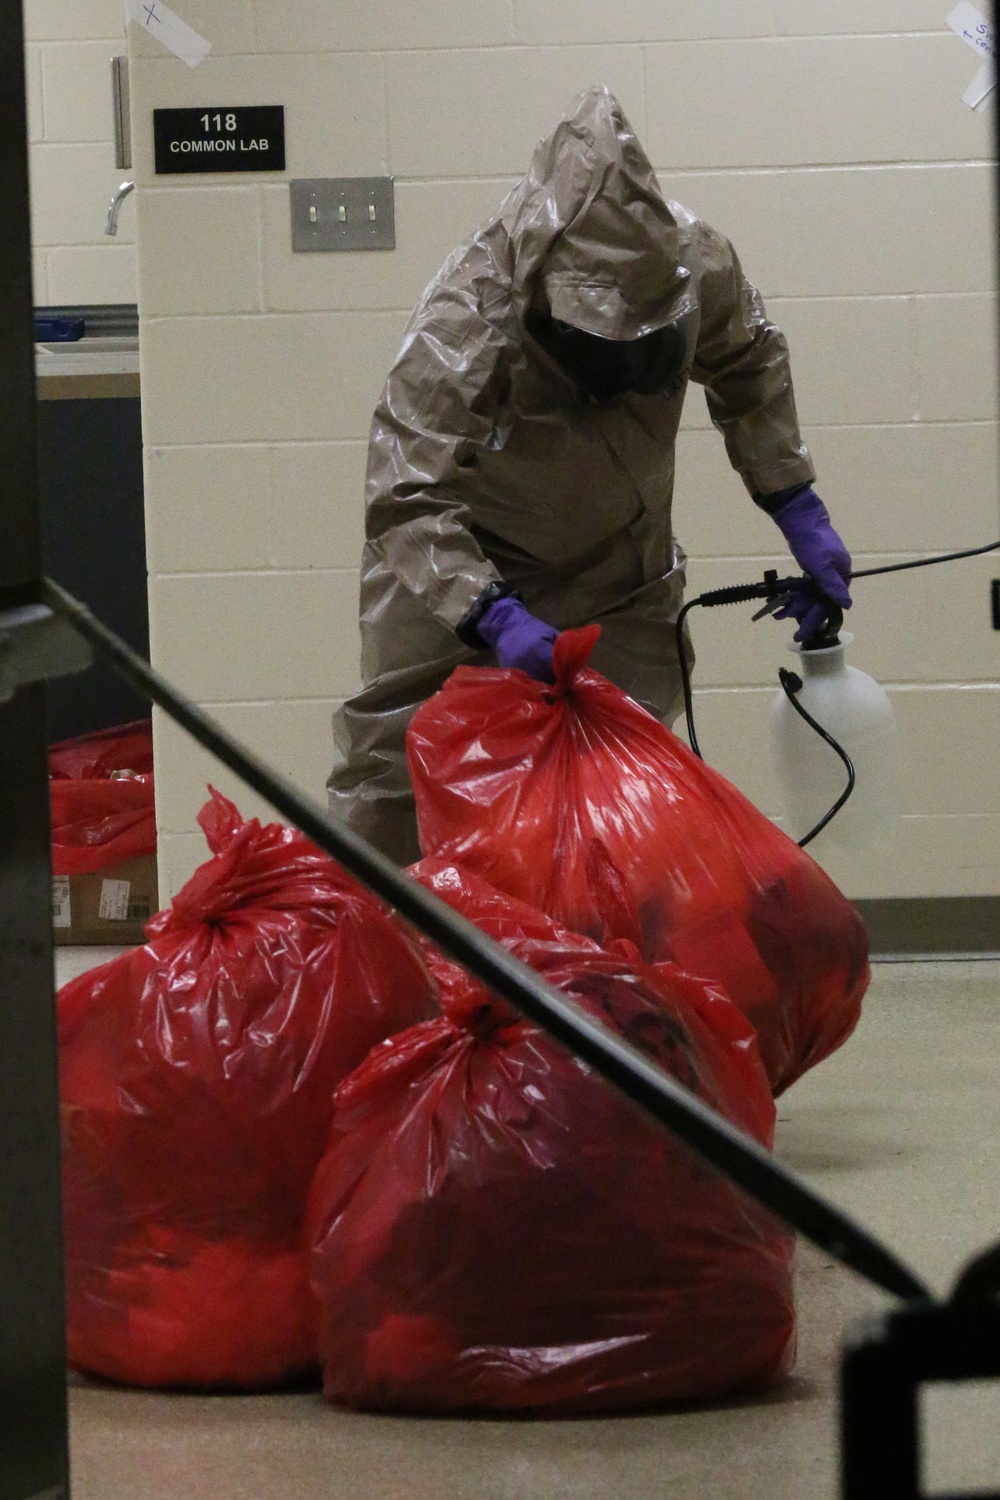 Iowa Soldiers and Airmen sanitize COVID-19 testing site